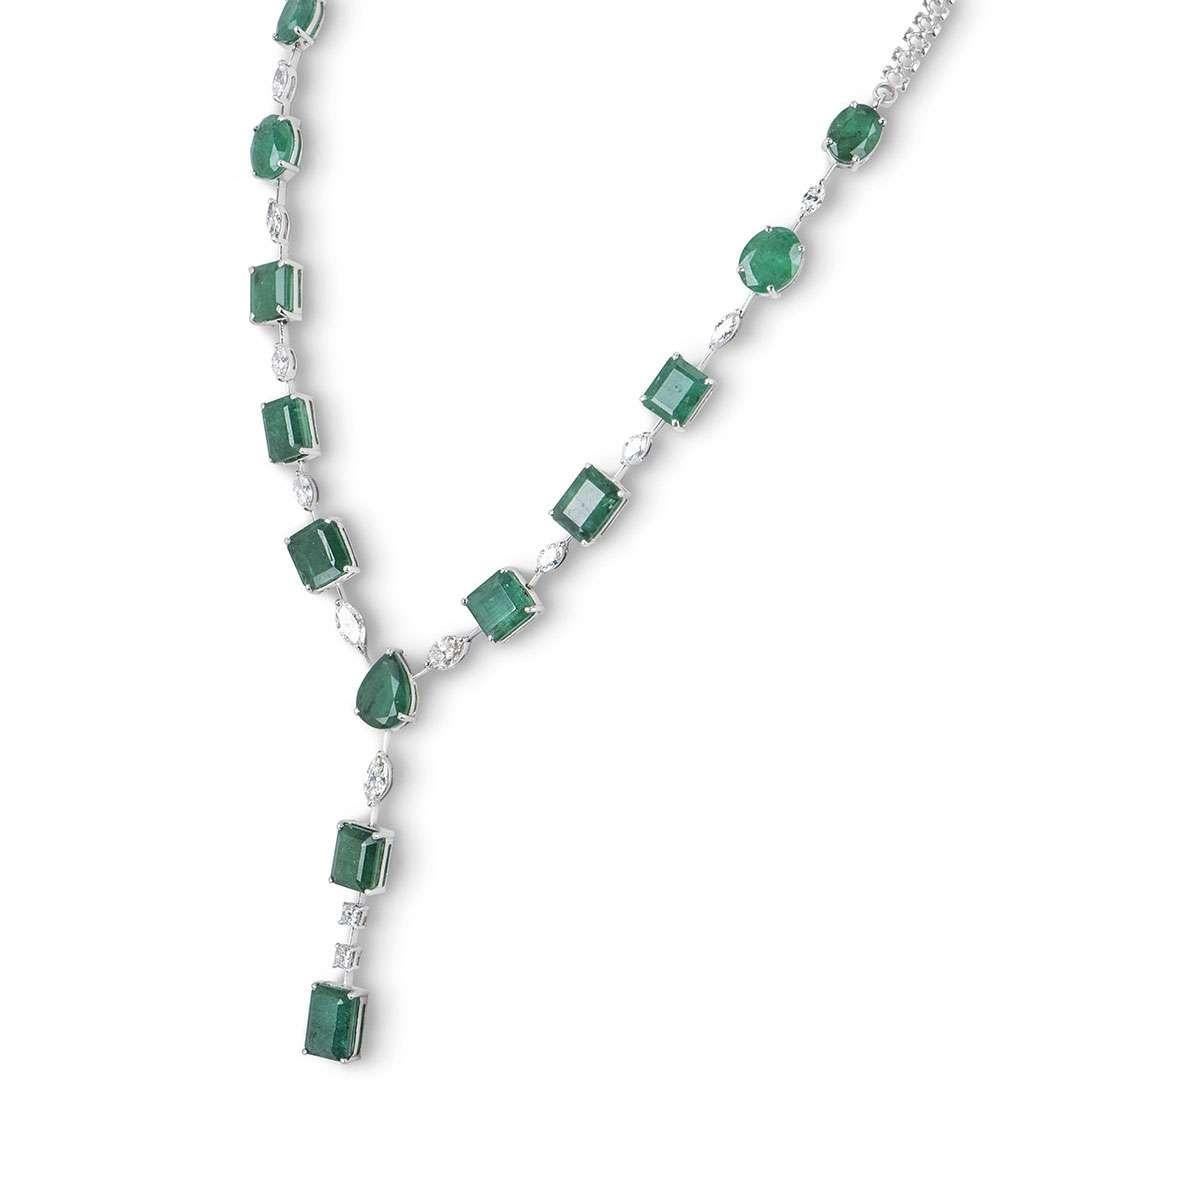 An 18k white gold necklace and earring jewellery suite. The necklace features 13 emeralds in a range of cuts, 11 marquise cut diamonds and 2 princess cut diamonds. The earrings are made up of an oval cut diamond, followed by 2 princess cut diamonds,